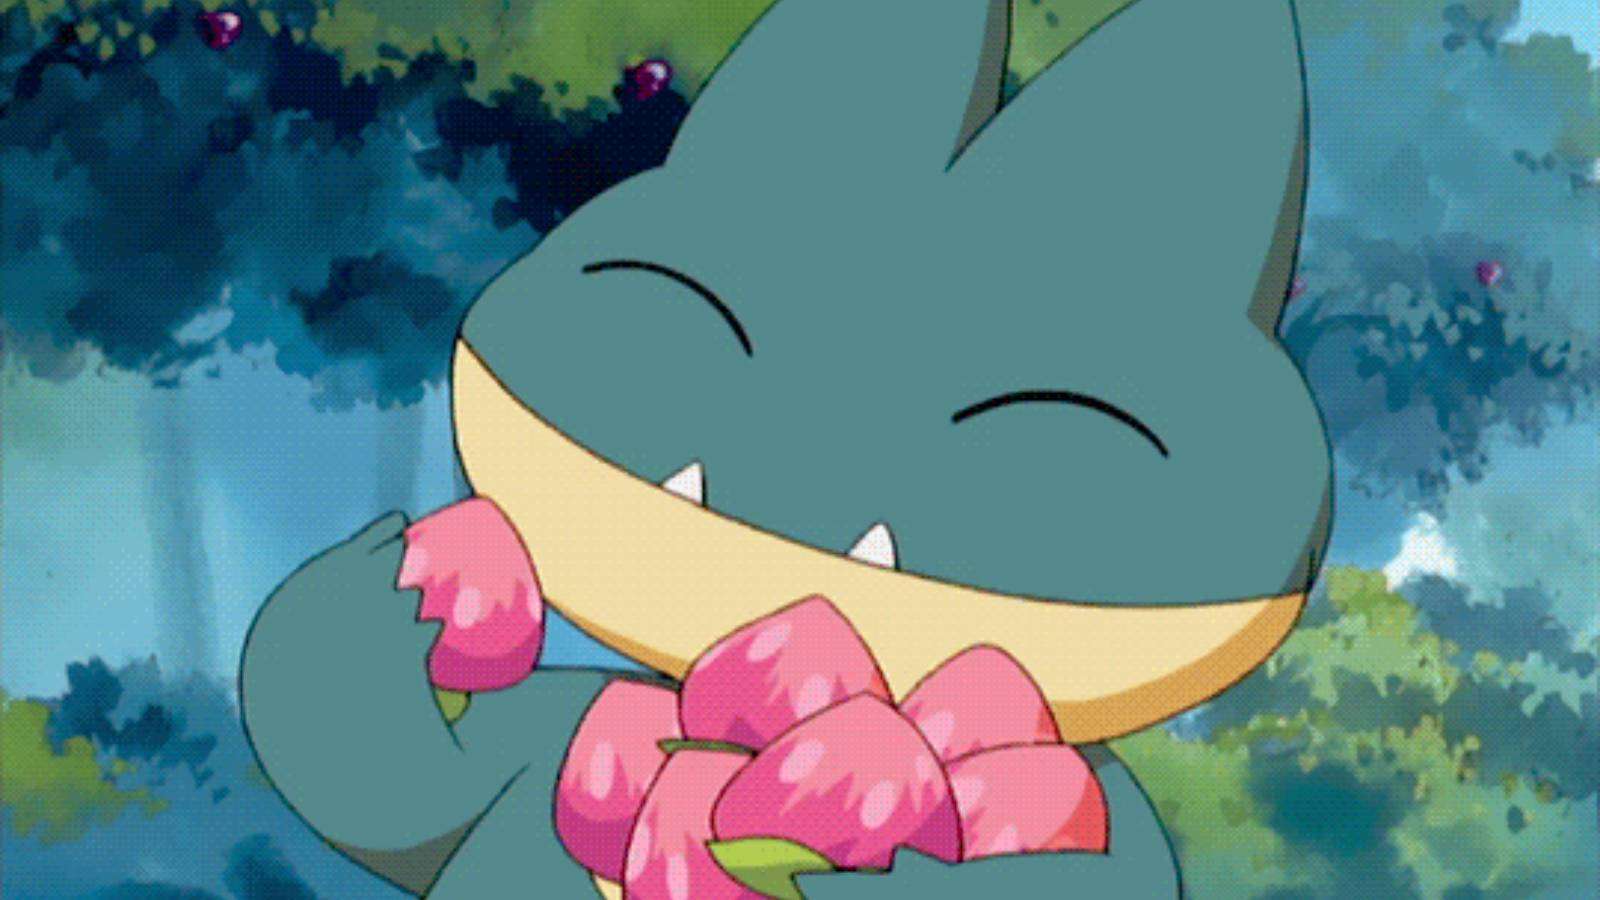 The Pokemon Munchlax holds a pile of berries